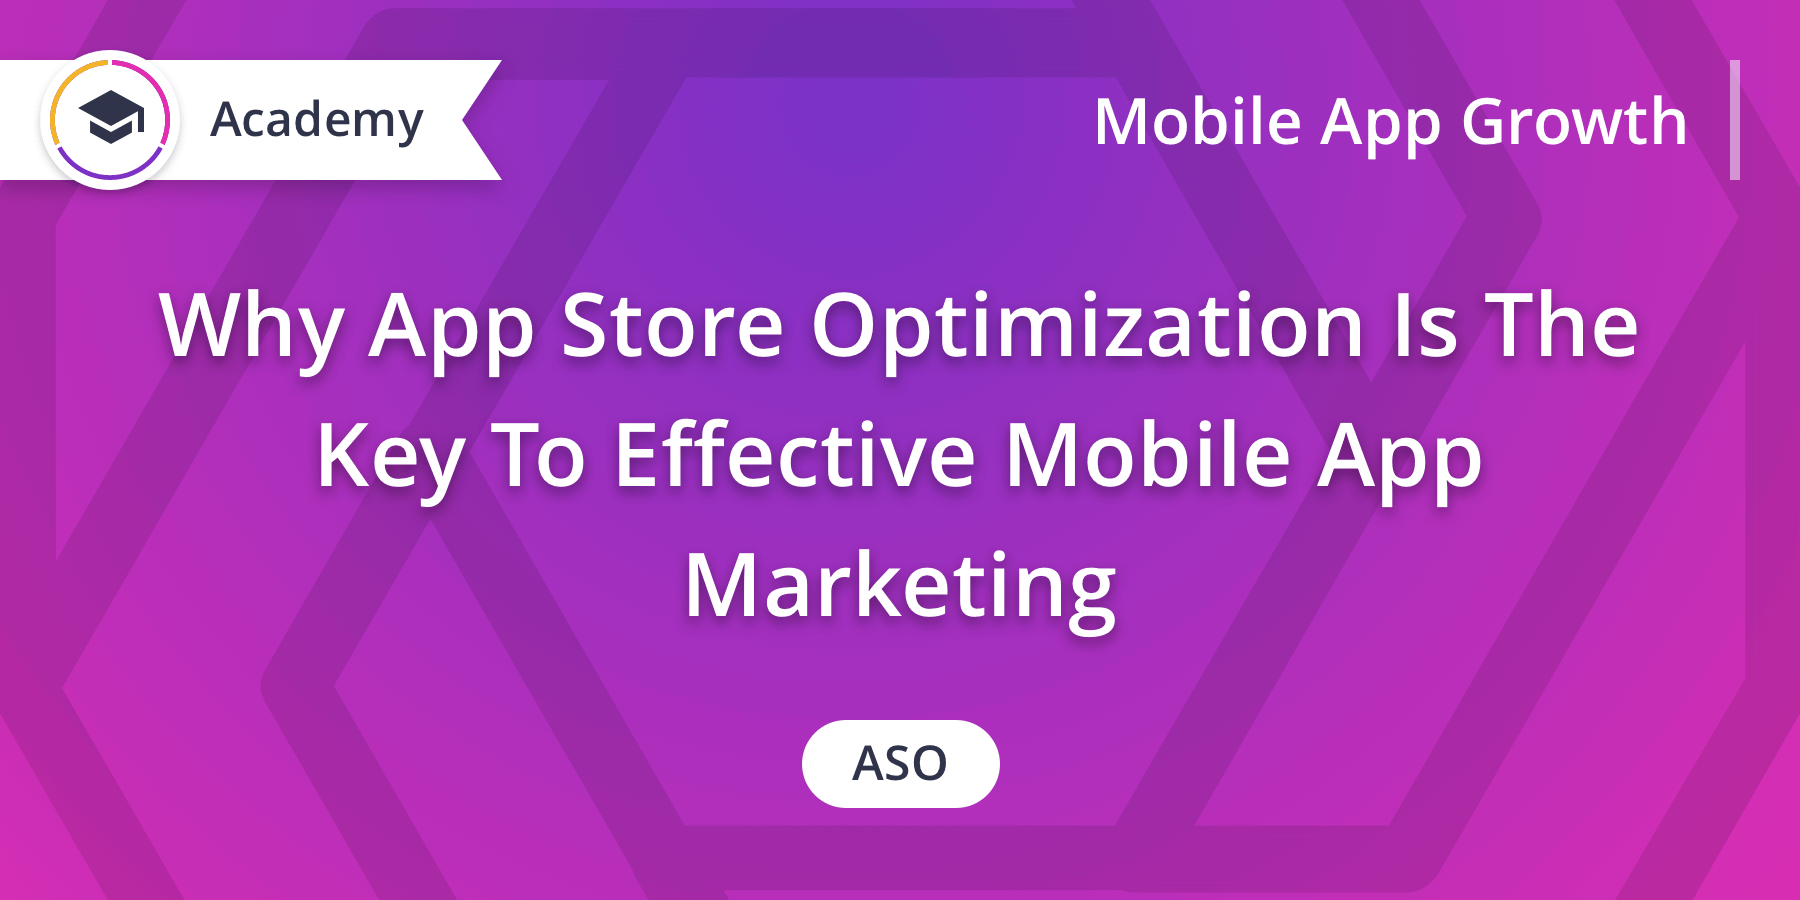 How Does App Store Optimization Work In Successful Mobile App Marketing Campaigns?